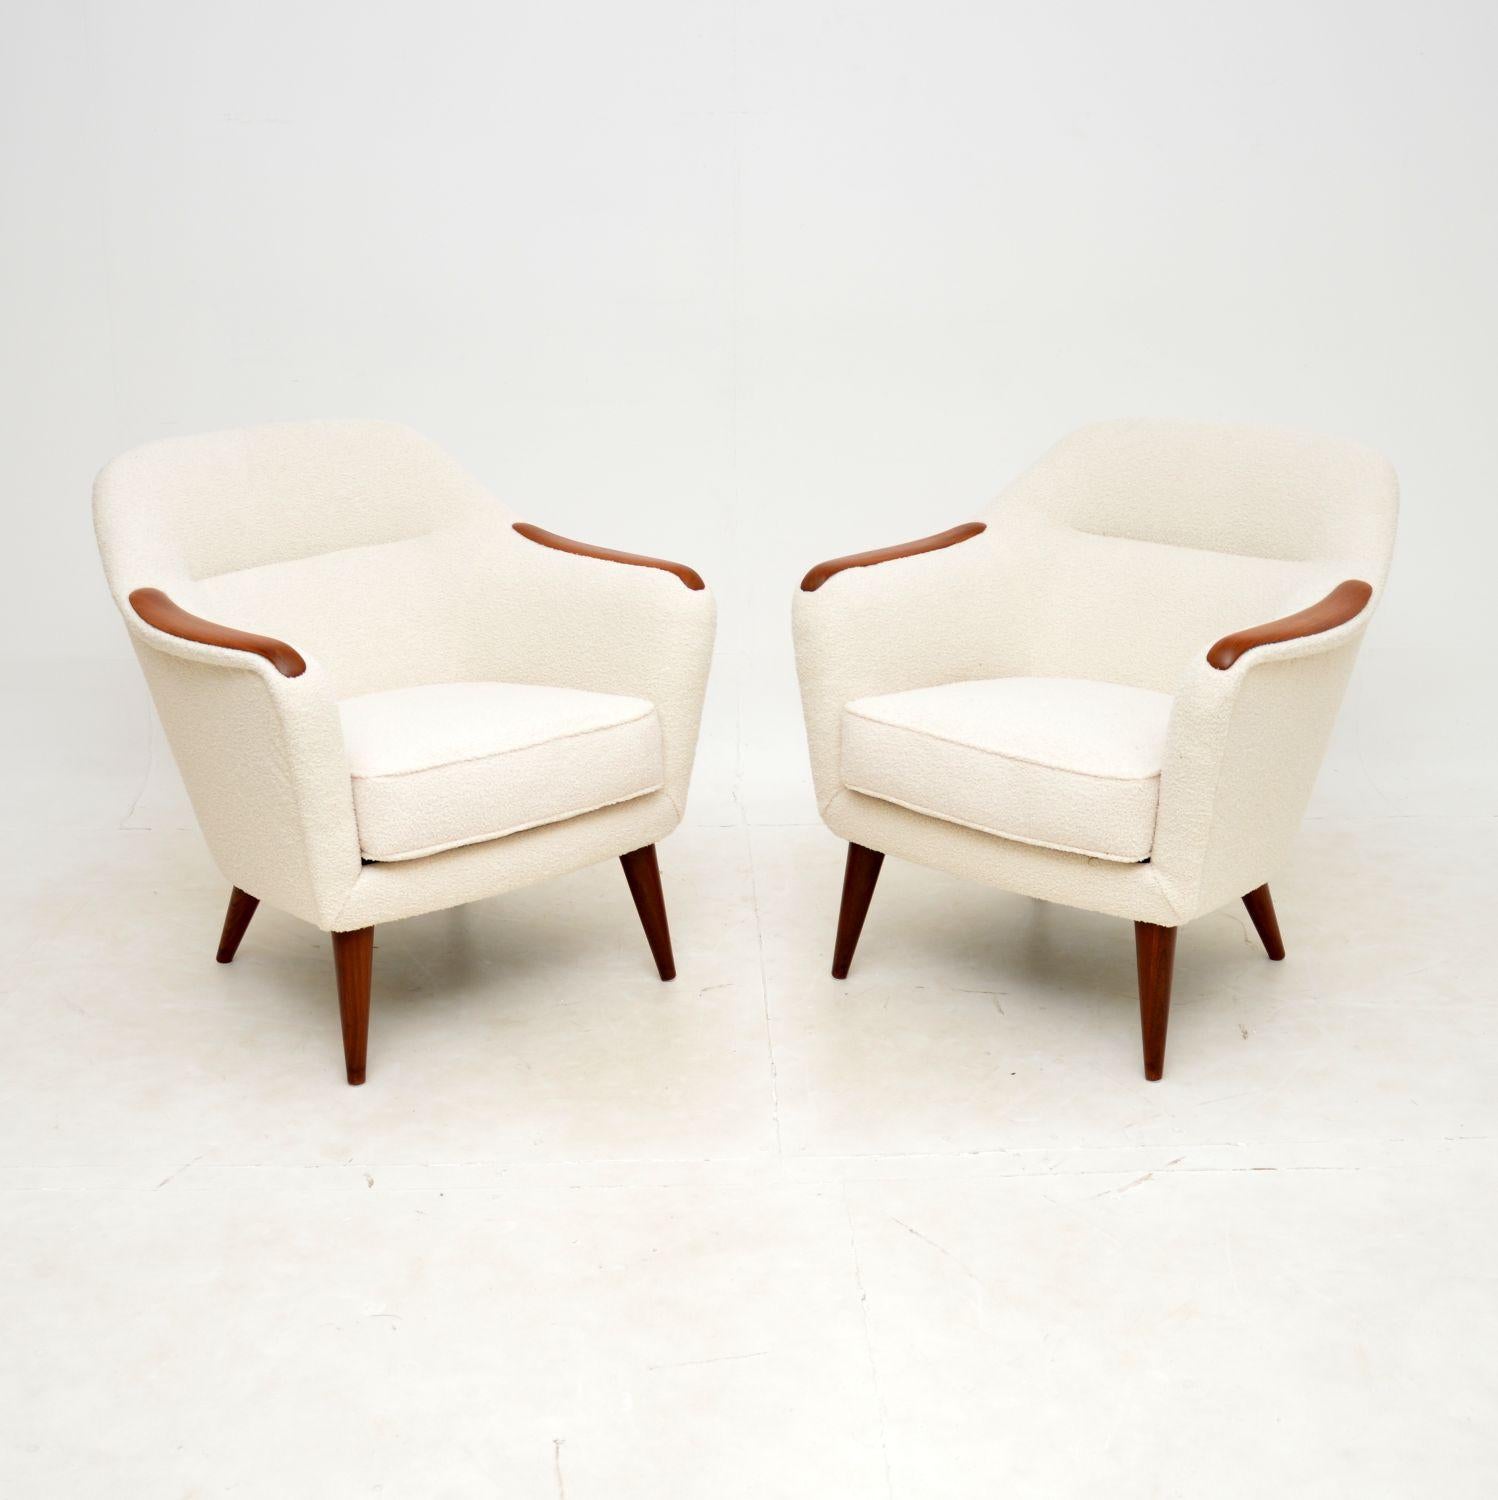 A very stylish, comfortable and extremely well made pair of vintage Swedish armchairs. They were recently imported from Sweden, they date from the 1960’s.

The quality is outstanding, they have beautiful teak armrests and sit on beautifully tapered